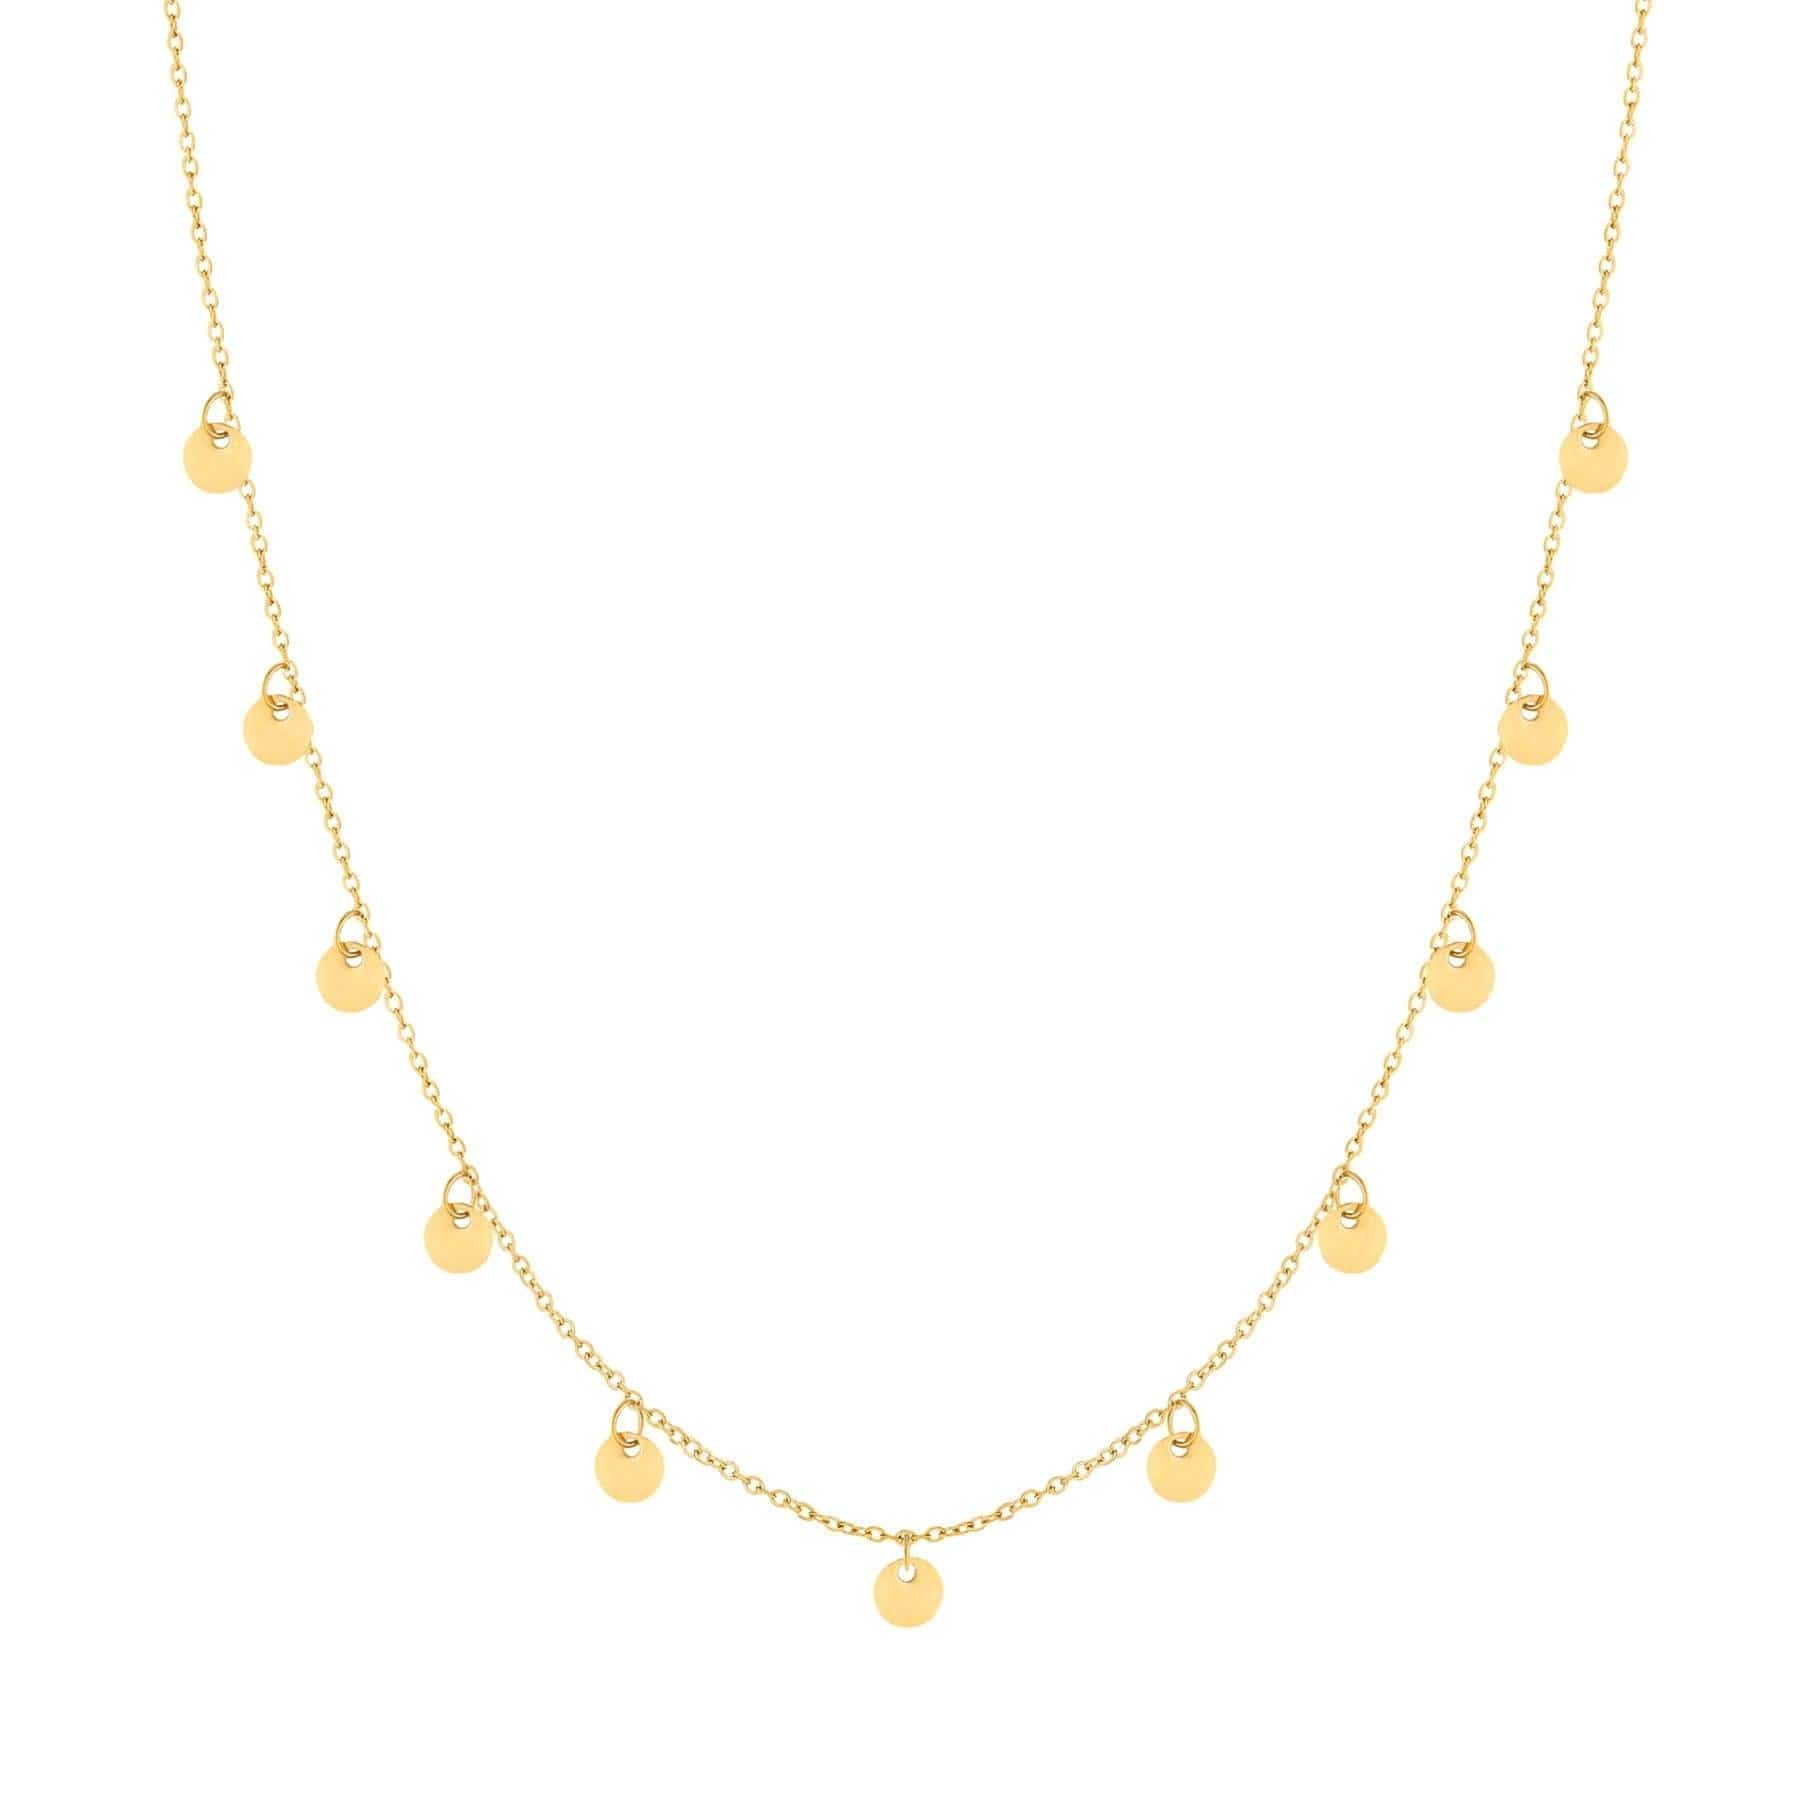 BohoMoon Stainless Steel Disc Necklace Gold